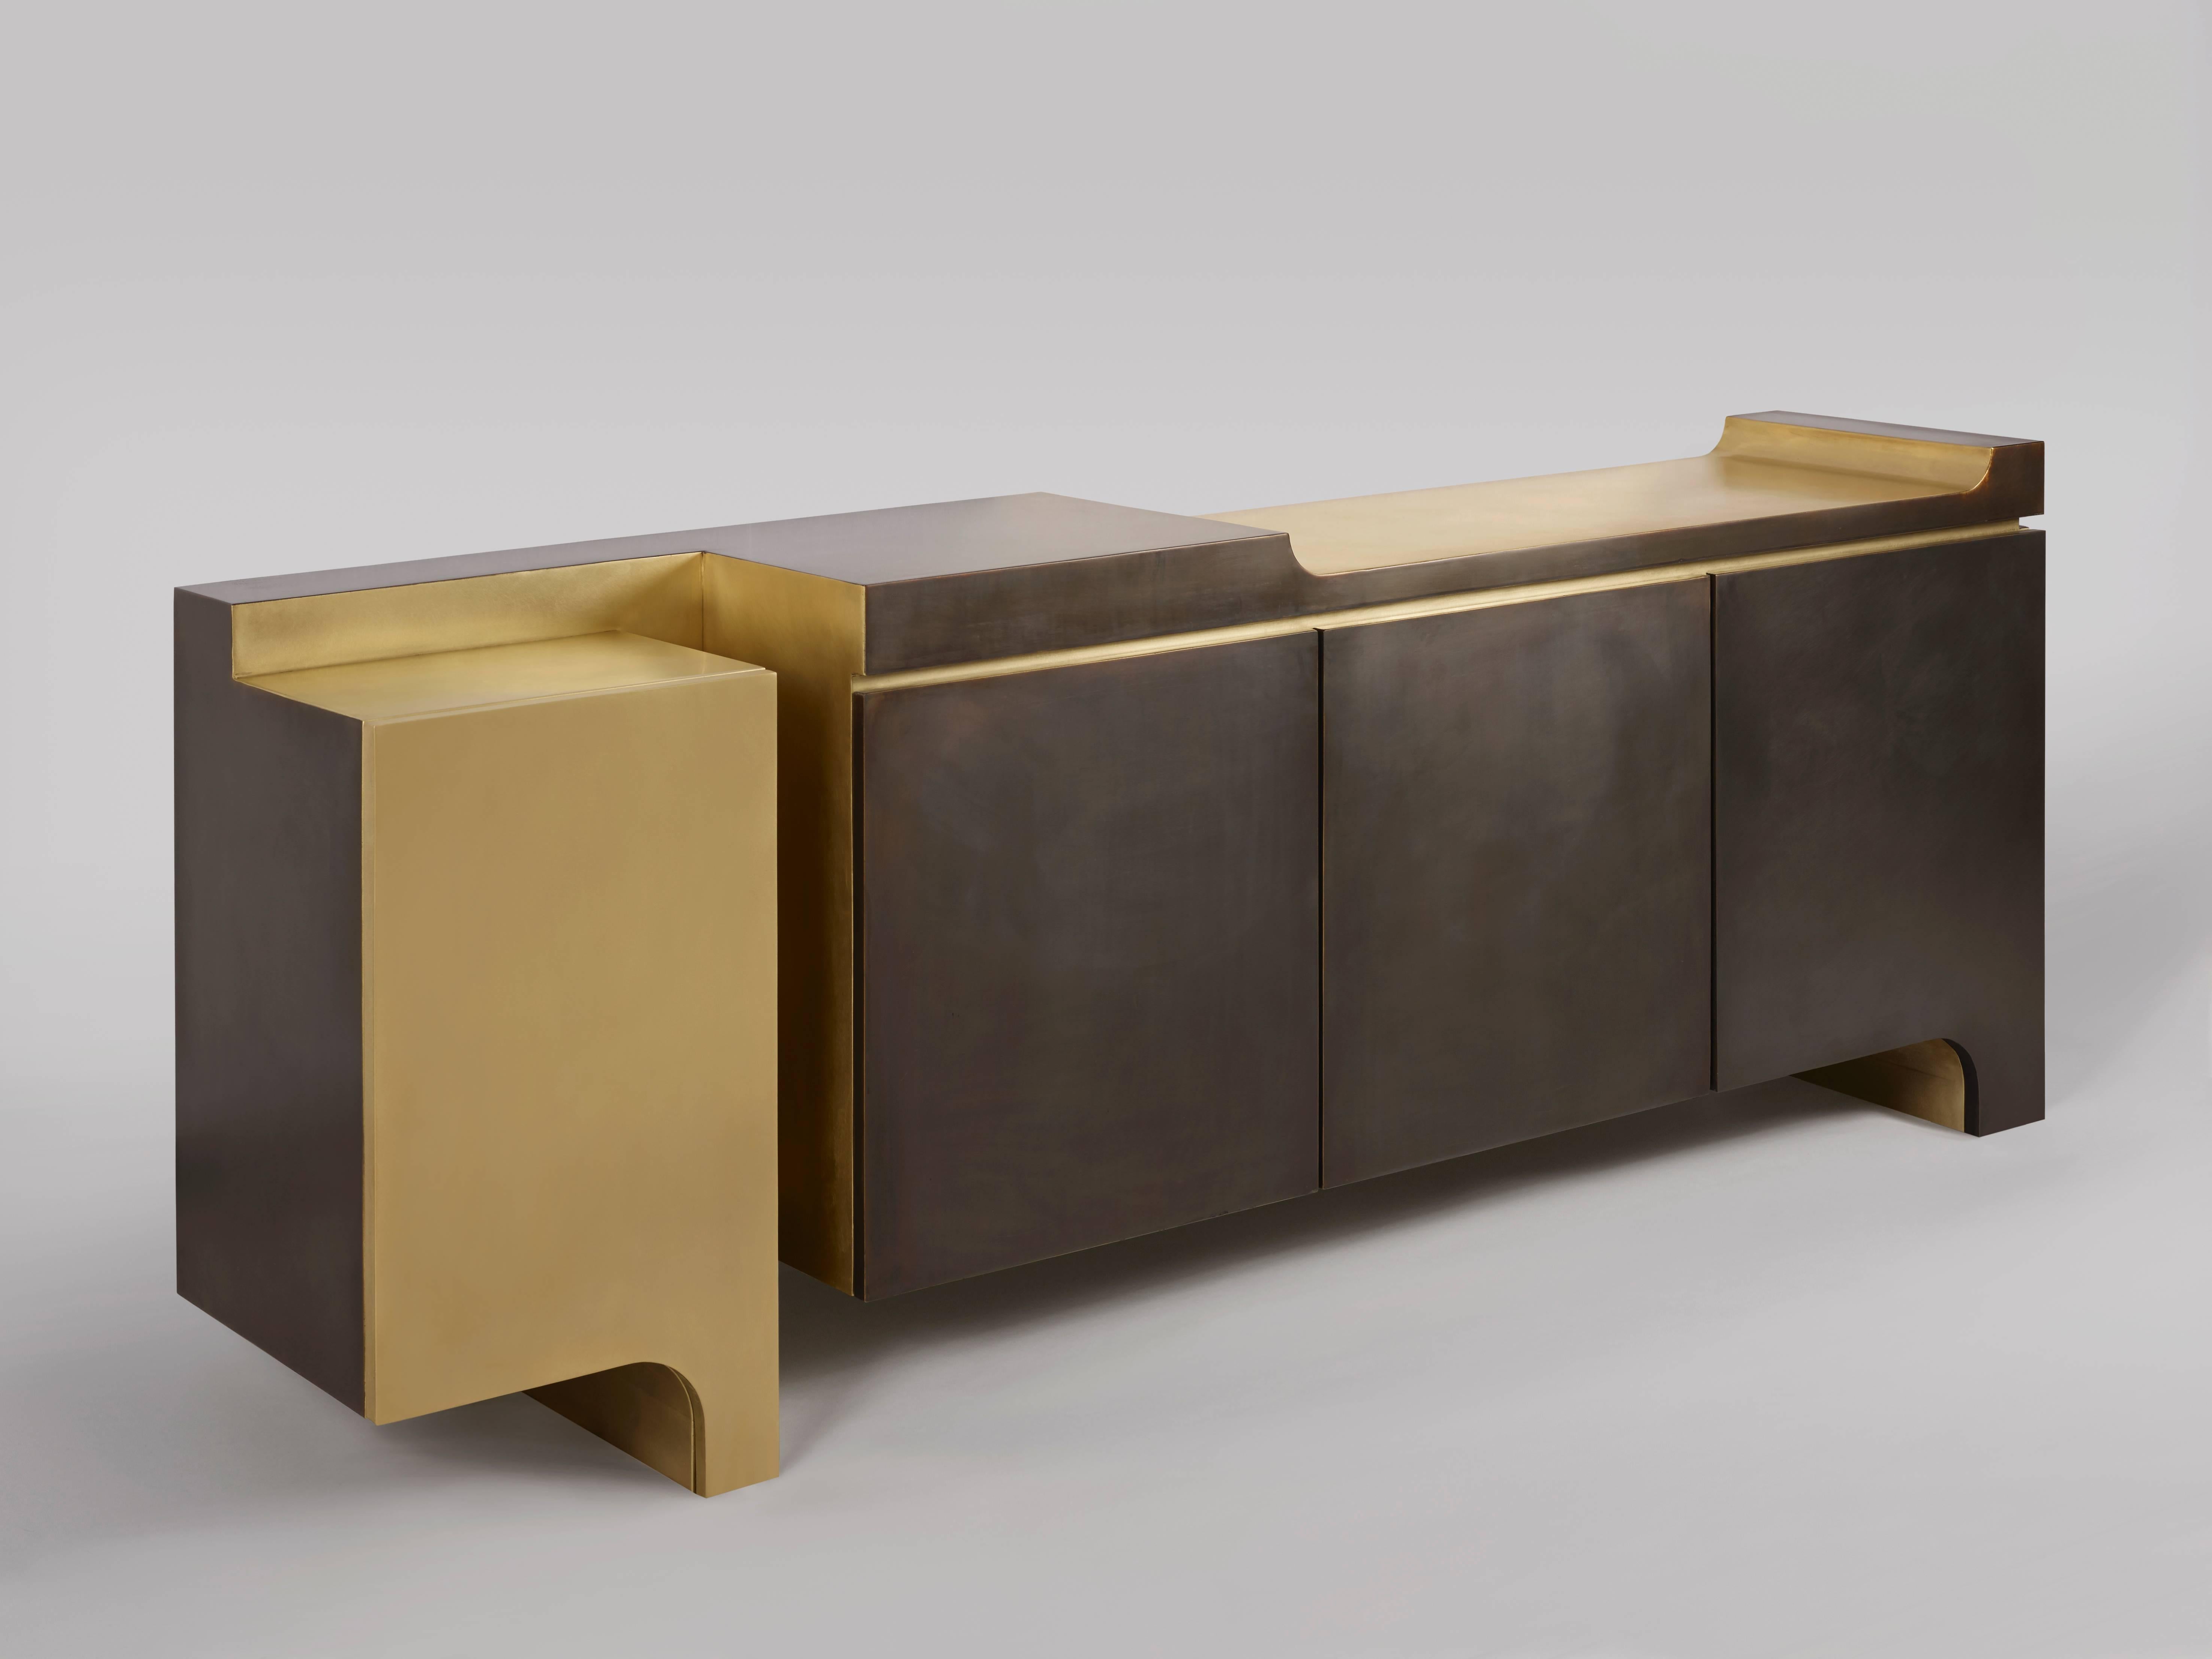 ‘XiangSheng II' Cabinet is an elegant collectible design work that combines surfaces in brushed bronze, with a very refined champagne color, and surfaces in oxidized bronze with an intense brown patina. It is part of the ‘XiangSheng’ furniture